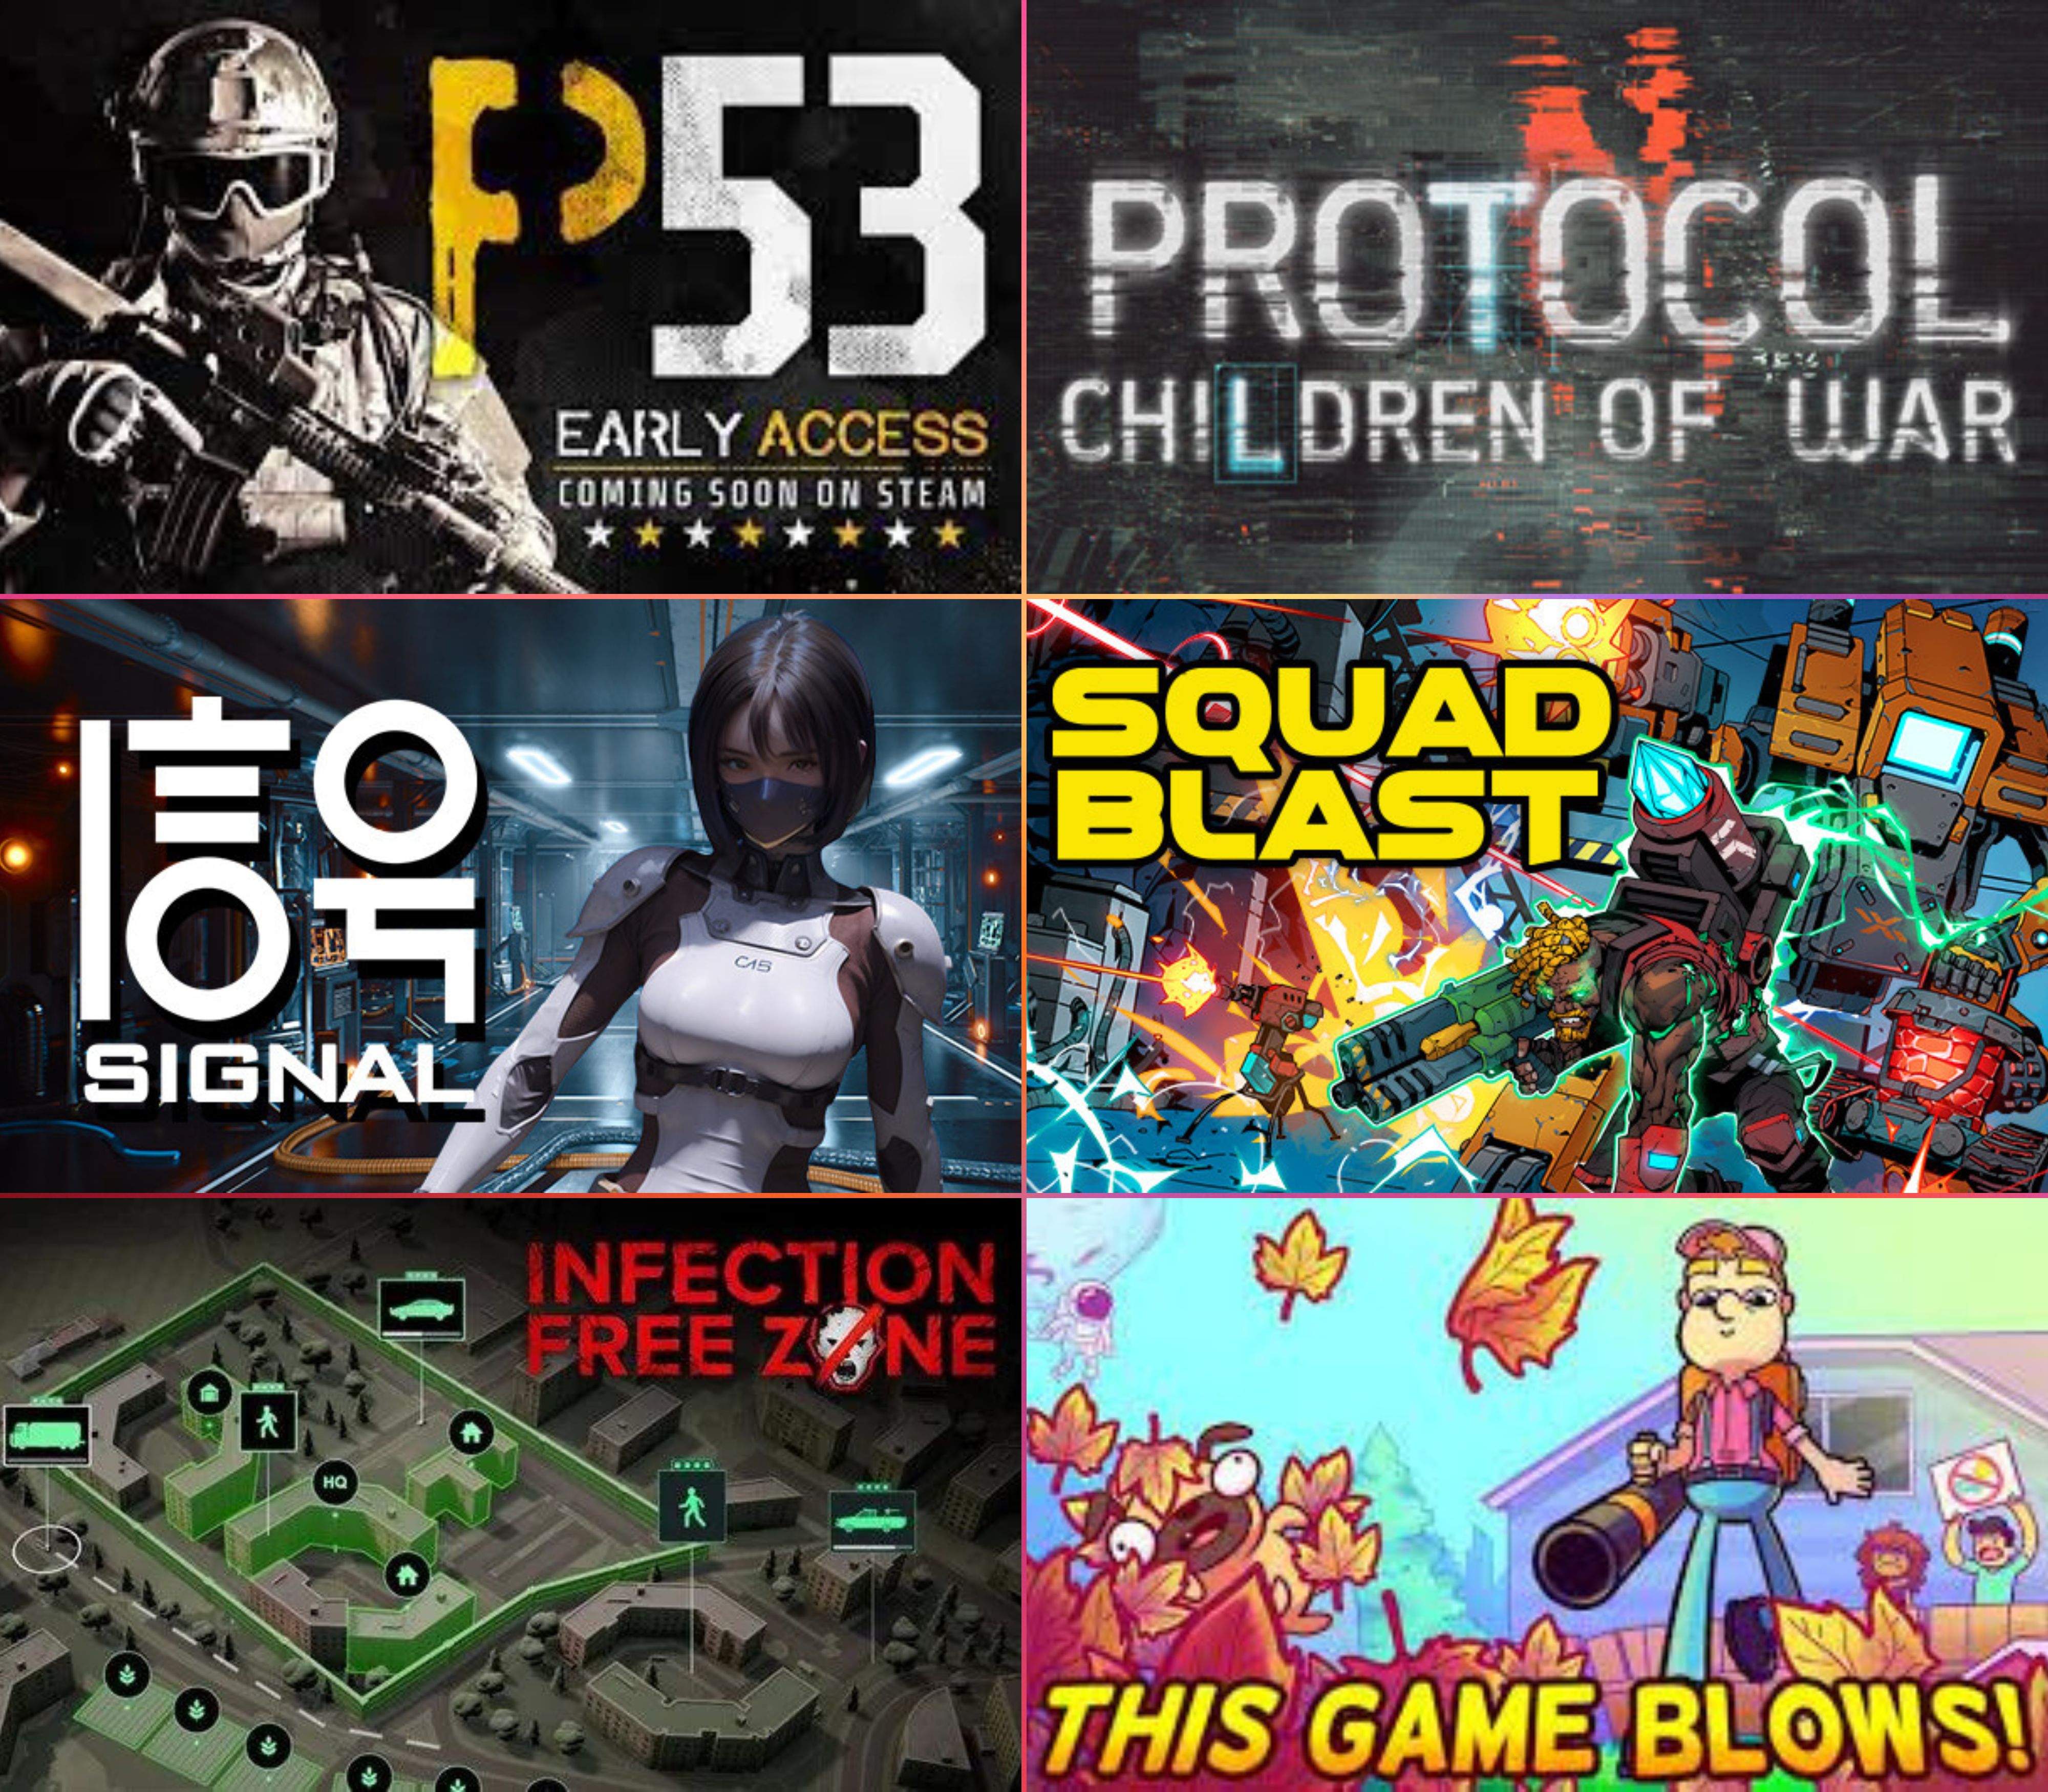 Free Steam Games✨ on X: 🦀 OCT 22 NEW FREE GAMES ON STEAM